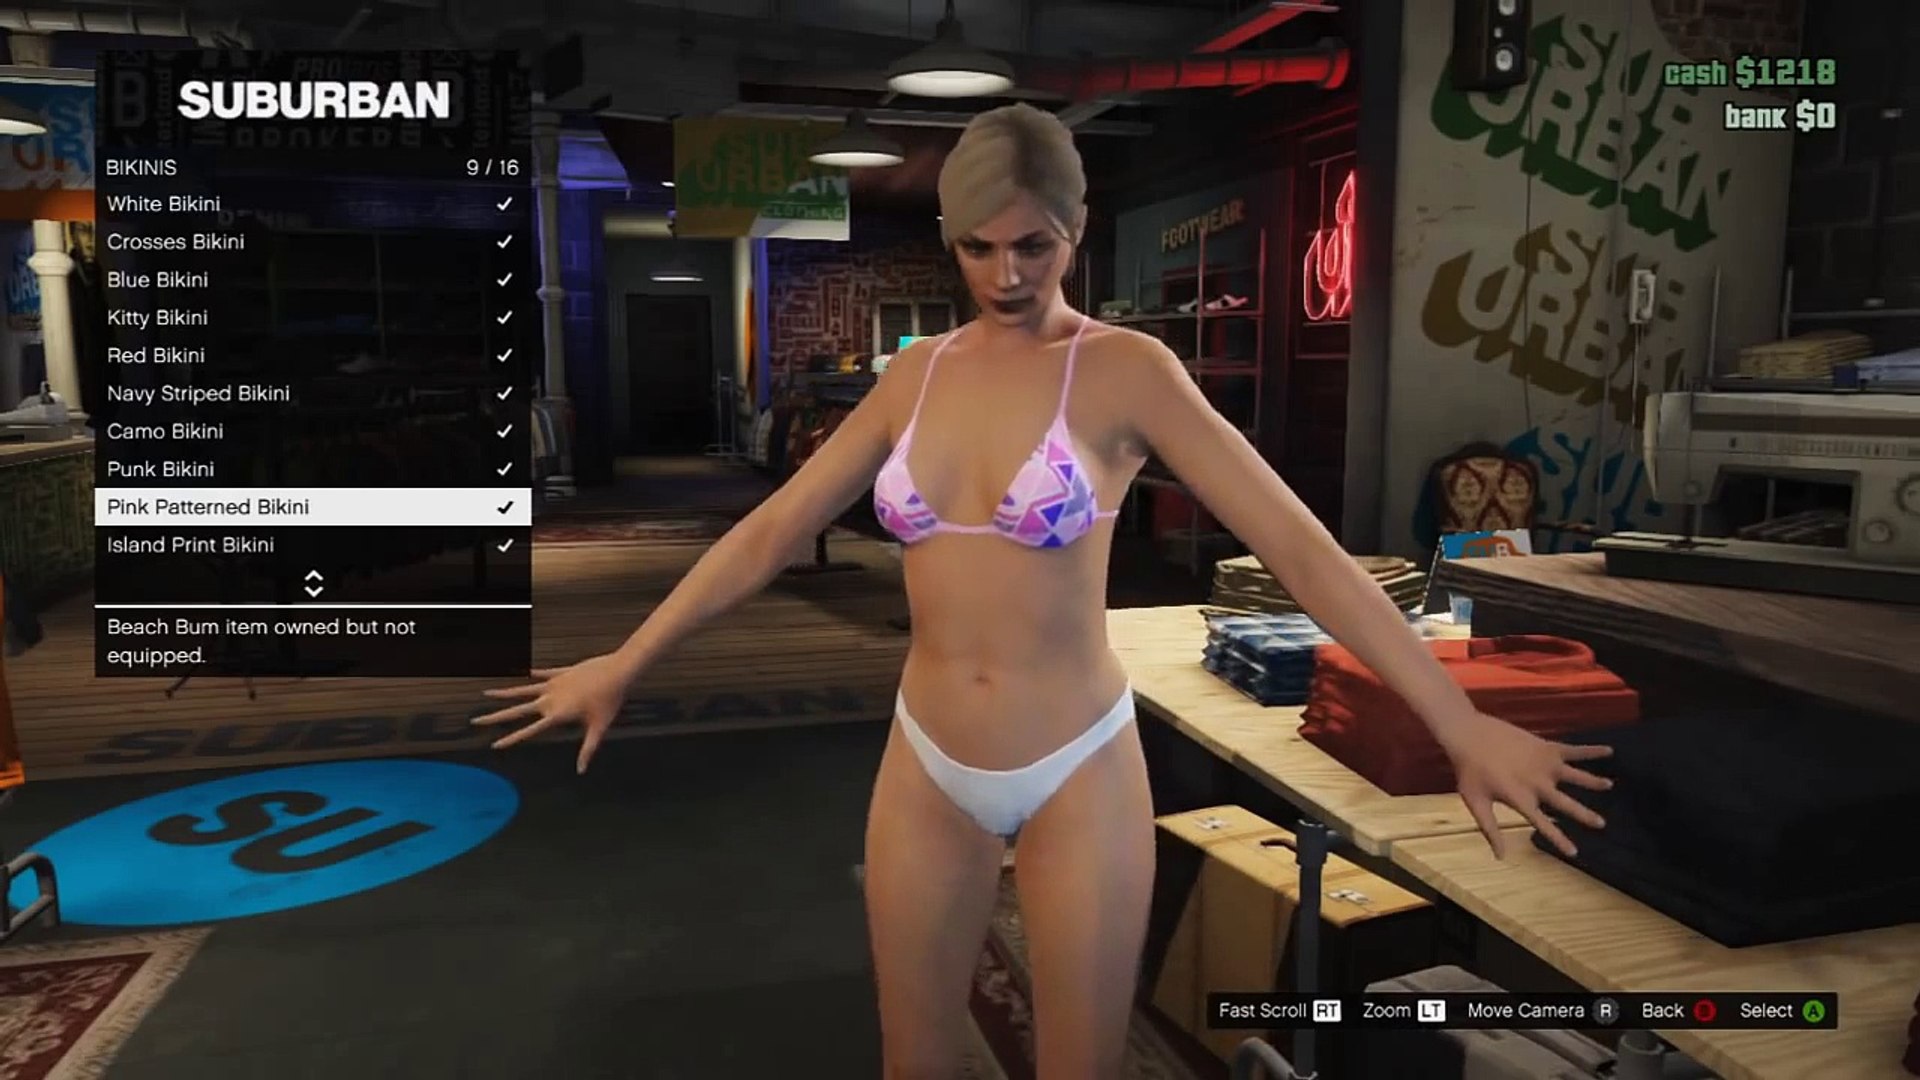 GRAND THEFT AUTO V Plot and Images; New Images from Rockstar's GTA 5.